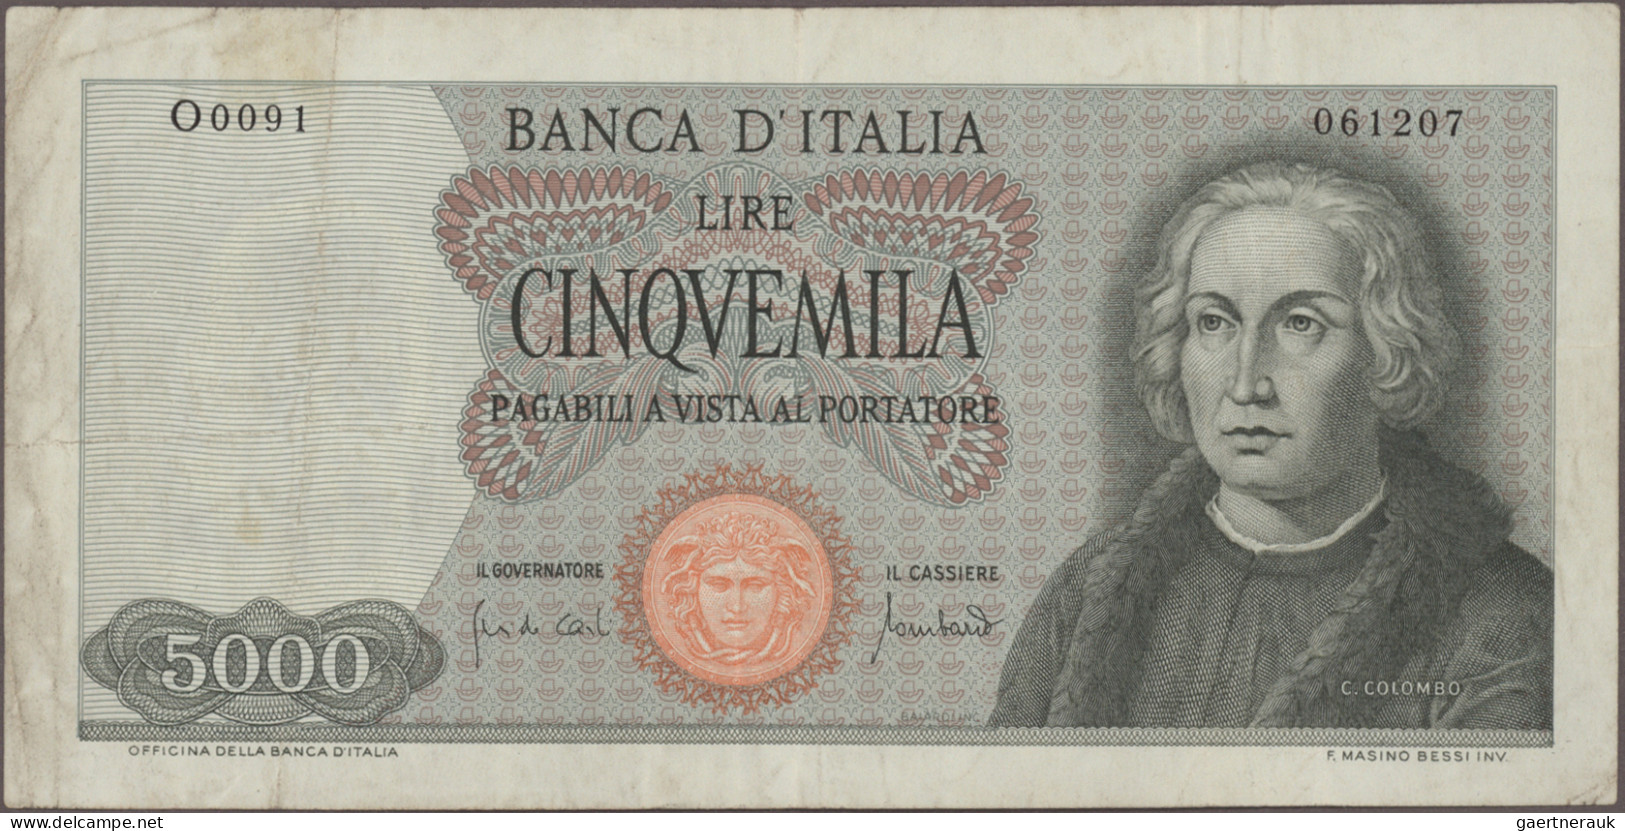 Italy: Banca d'Italia, giant lot with 66 banknotes, series 1966-1997 with a lot